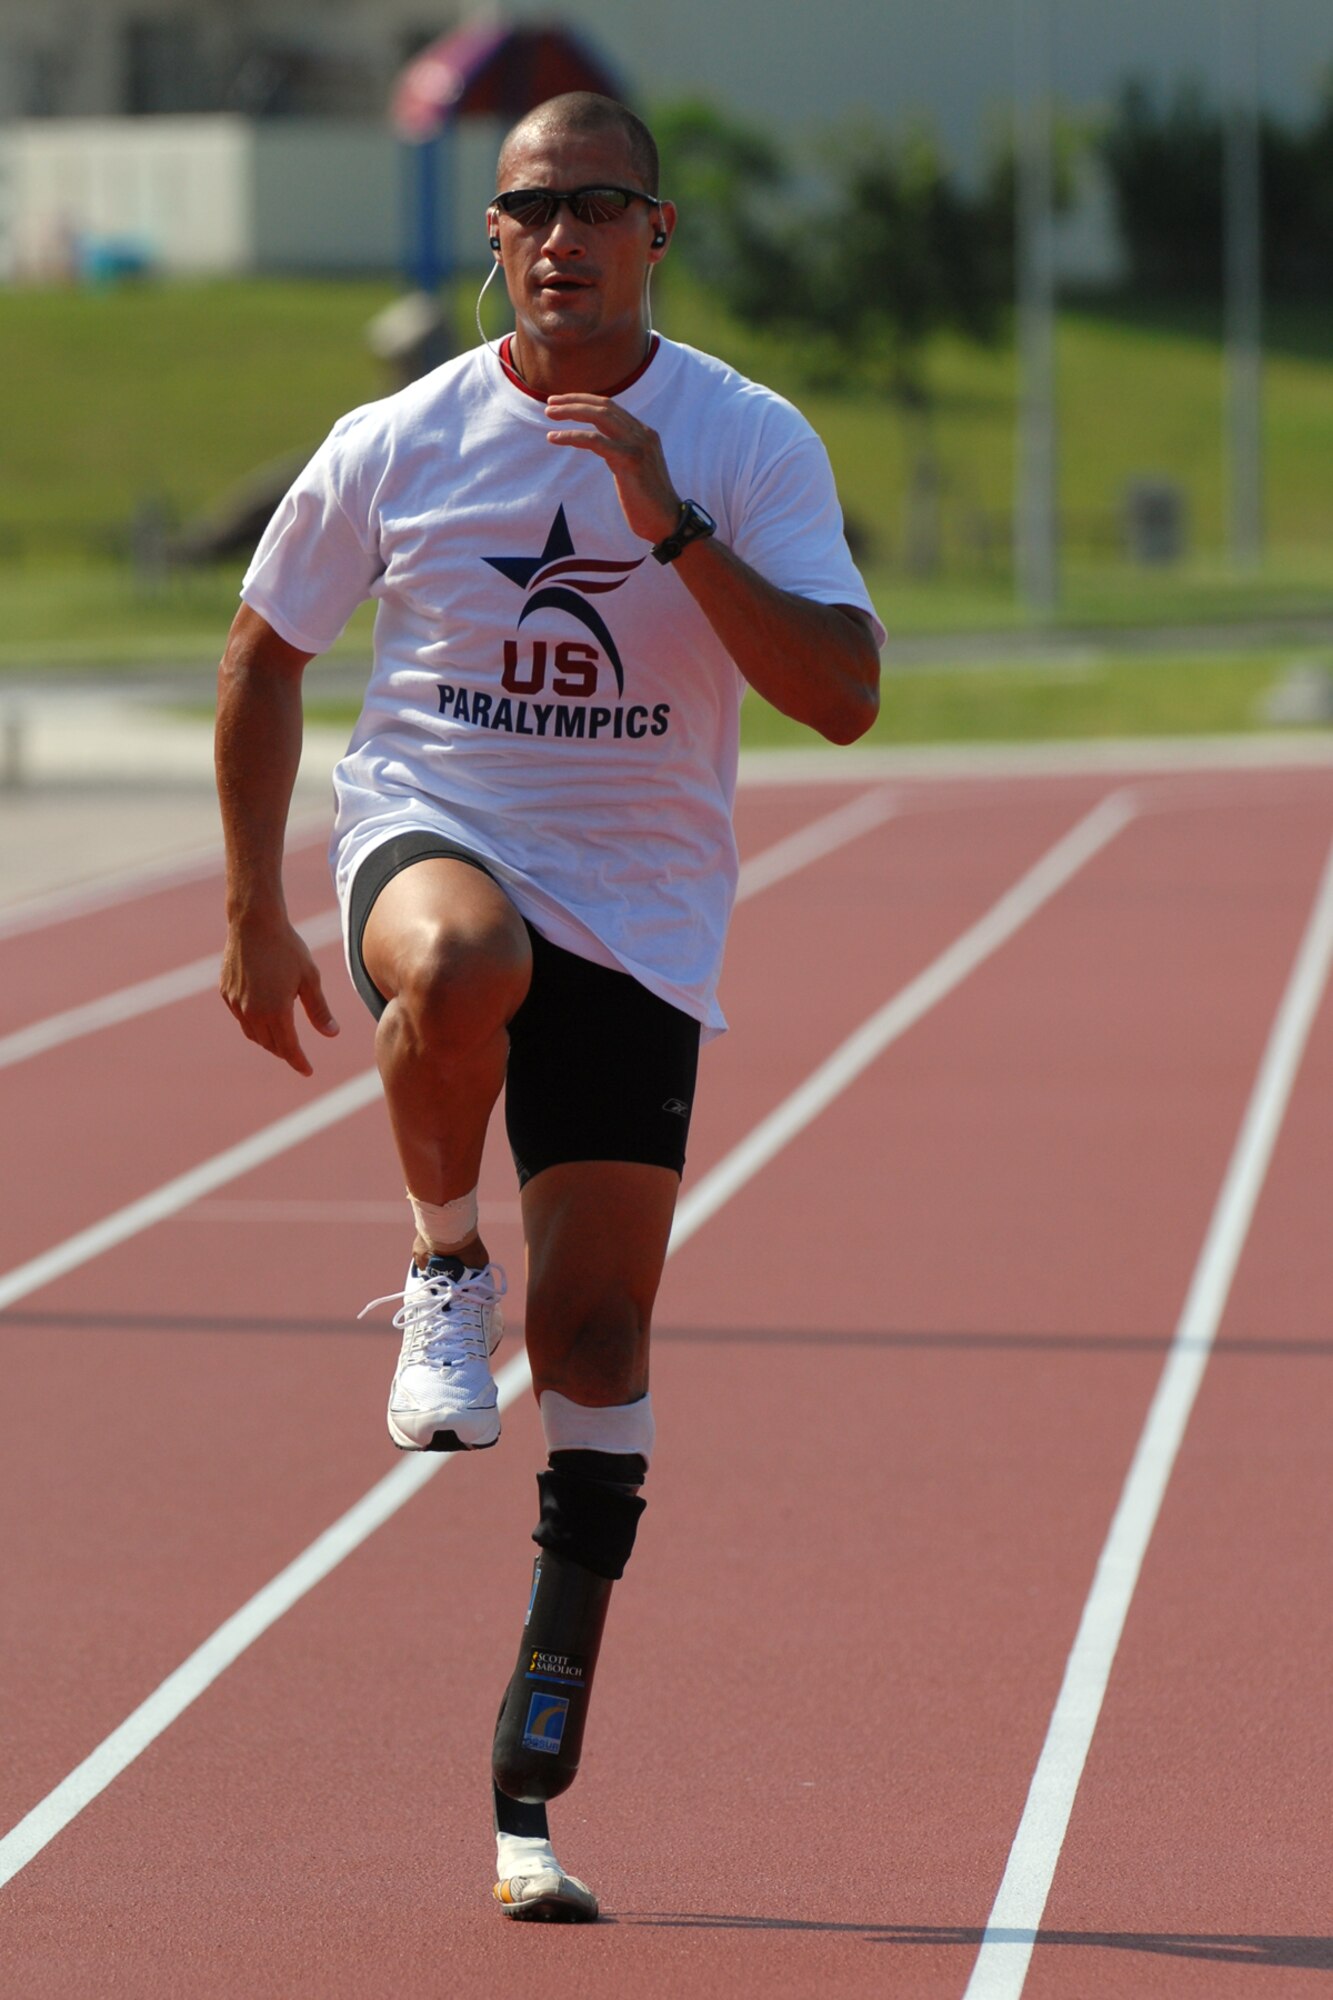 Marlon Shirley, a member of the U.S. Paralympics team, practices his stride during a training session at Kadena Air Base, Japan Aug. 28. More than 100 athletes and support staff from the U.S. Paralympics track and field and swim teams arrived at Kadena Aug. 24 to live and train for the next ten days in preparation for the 2008 Paralympic Games held in Beijing, China Sept. 6. (U.S. Air Force photo/Airman 1st Class Chad Warren)